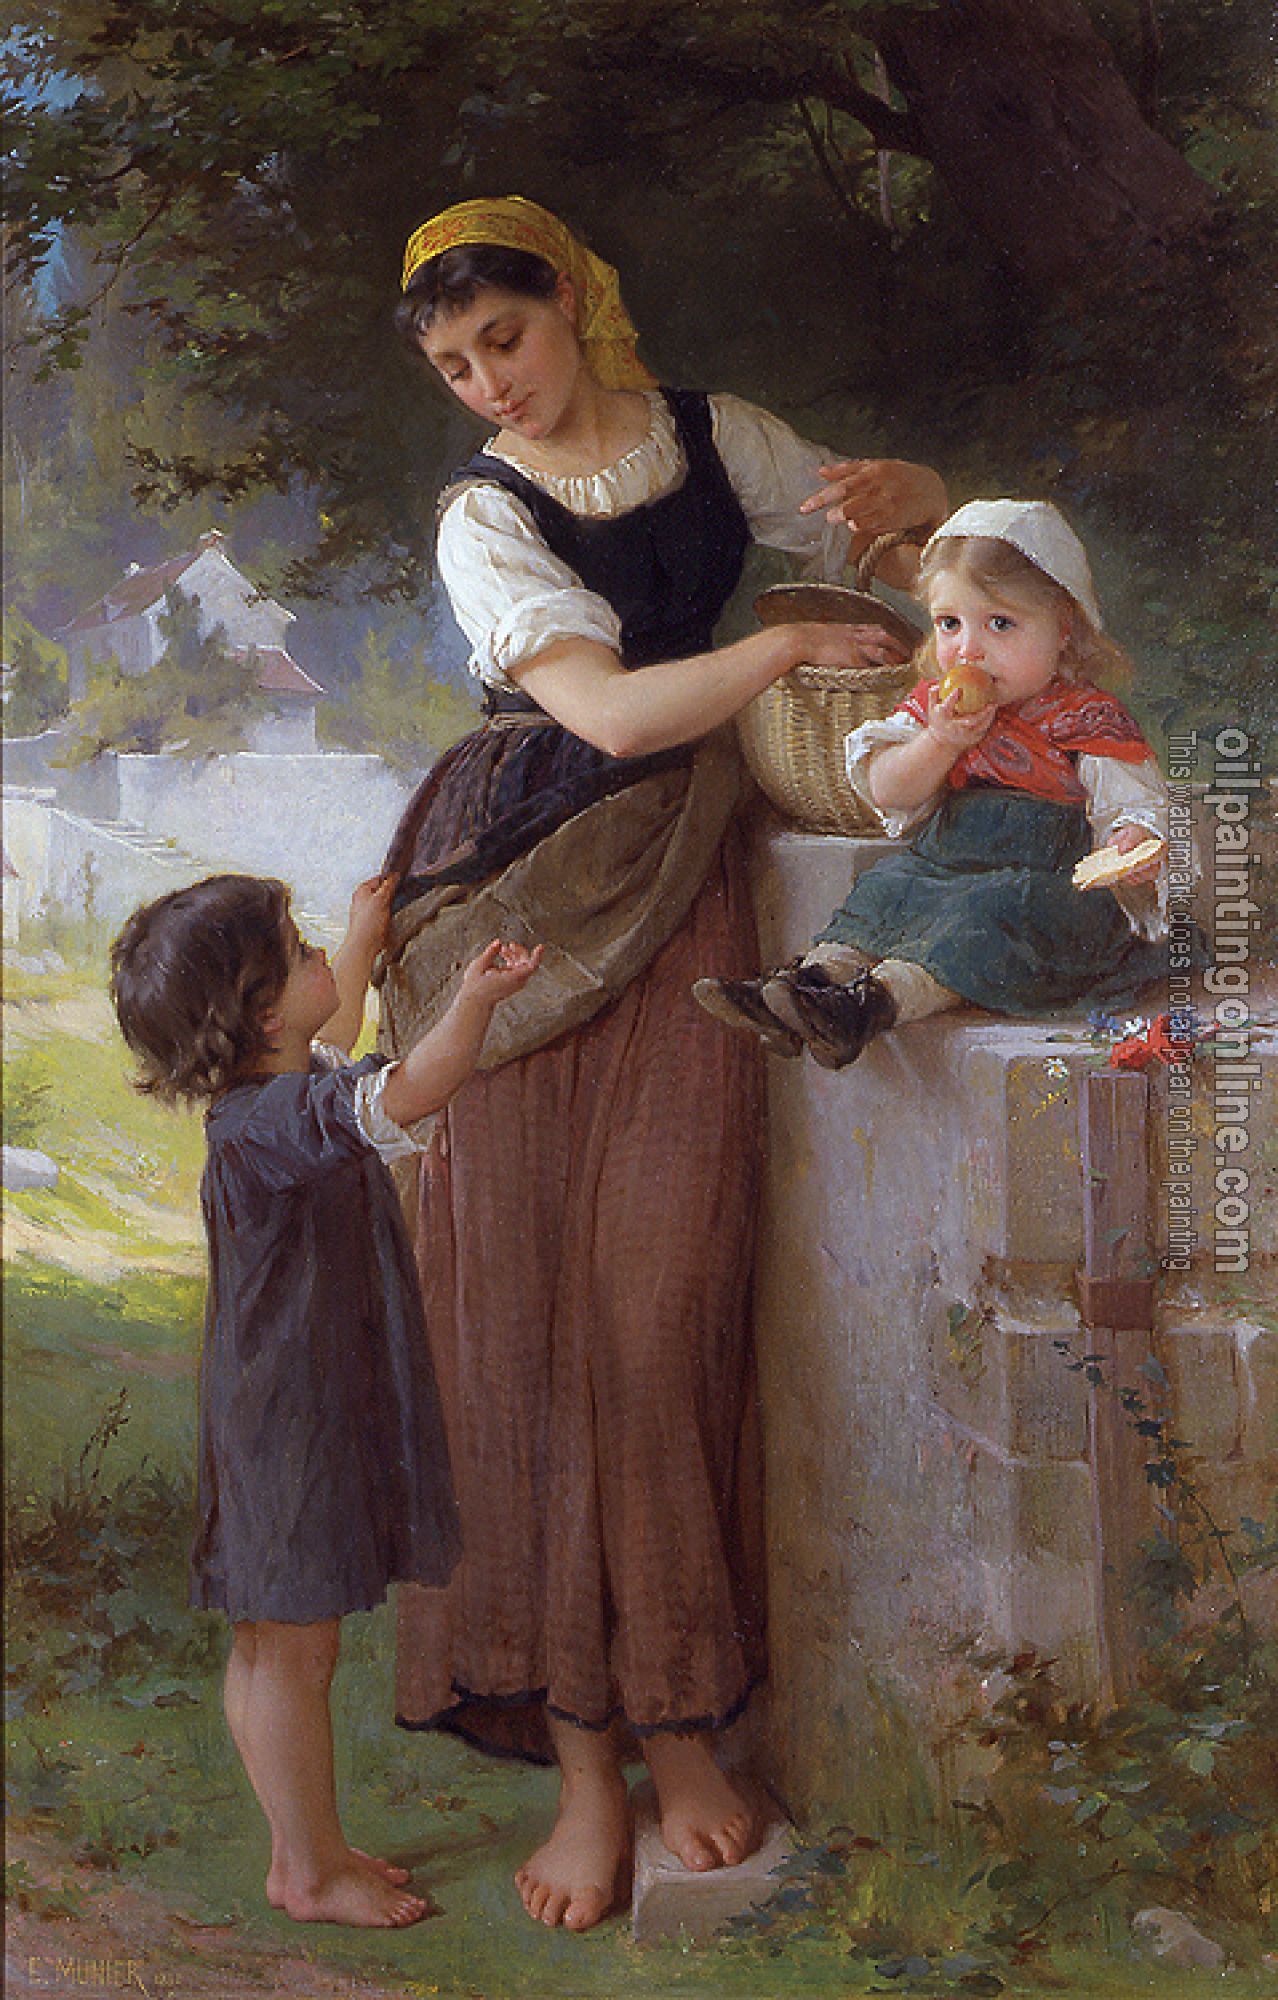 Emile Munier - may i have one too